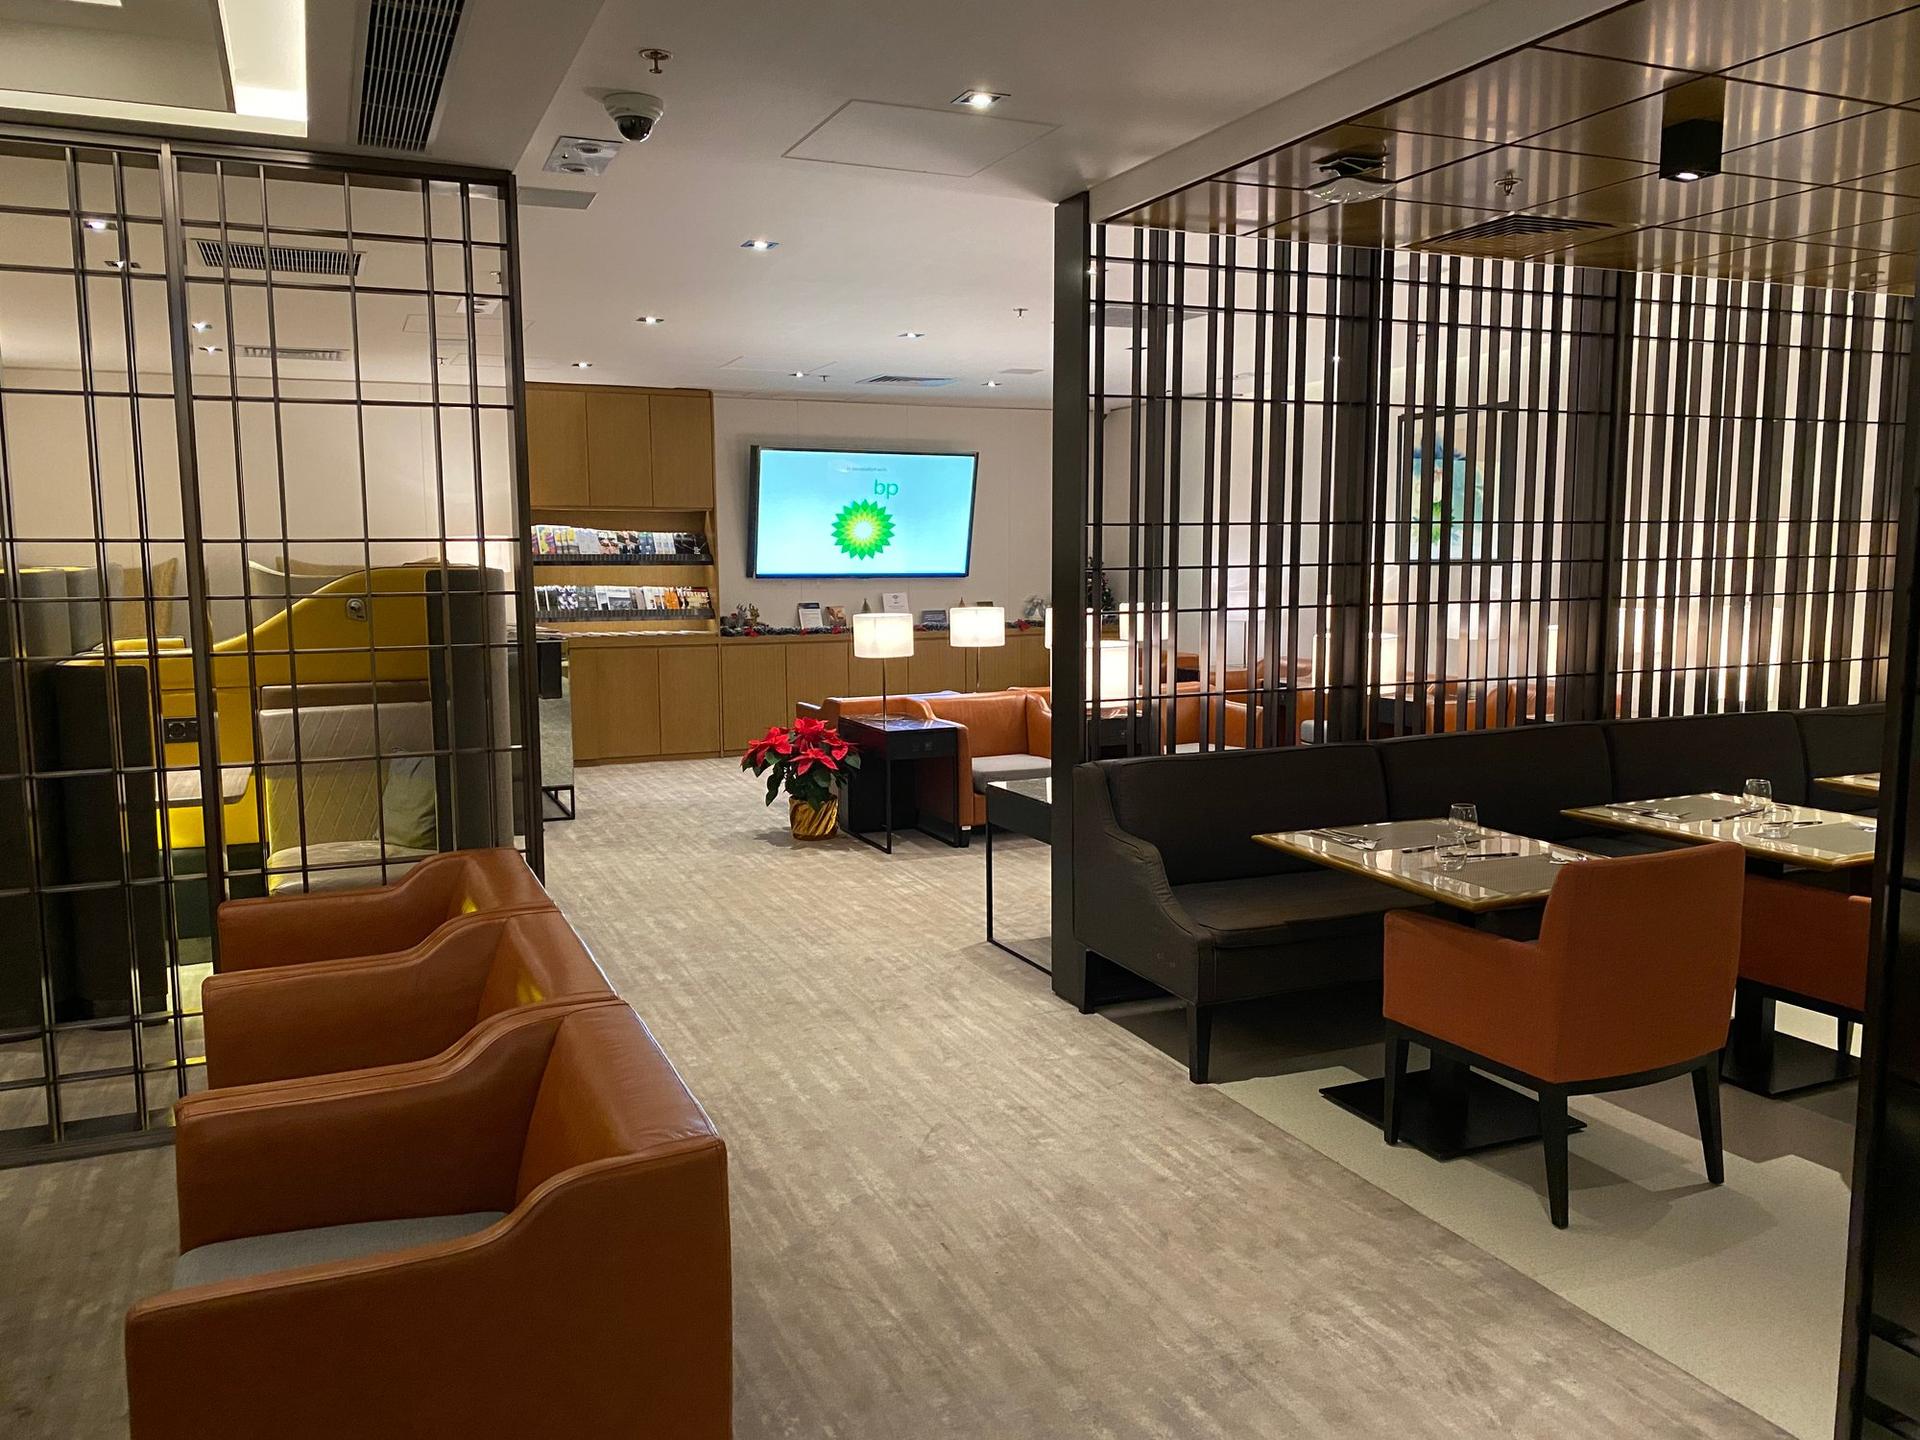 Singapore Airlines SilverKris Business Class Lounge image 66 of 68